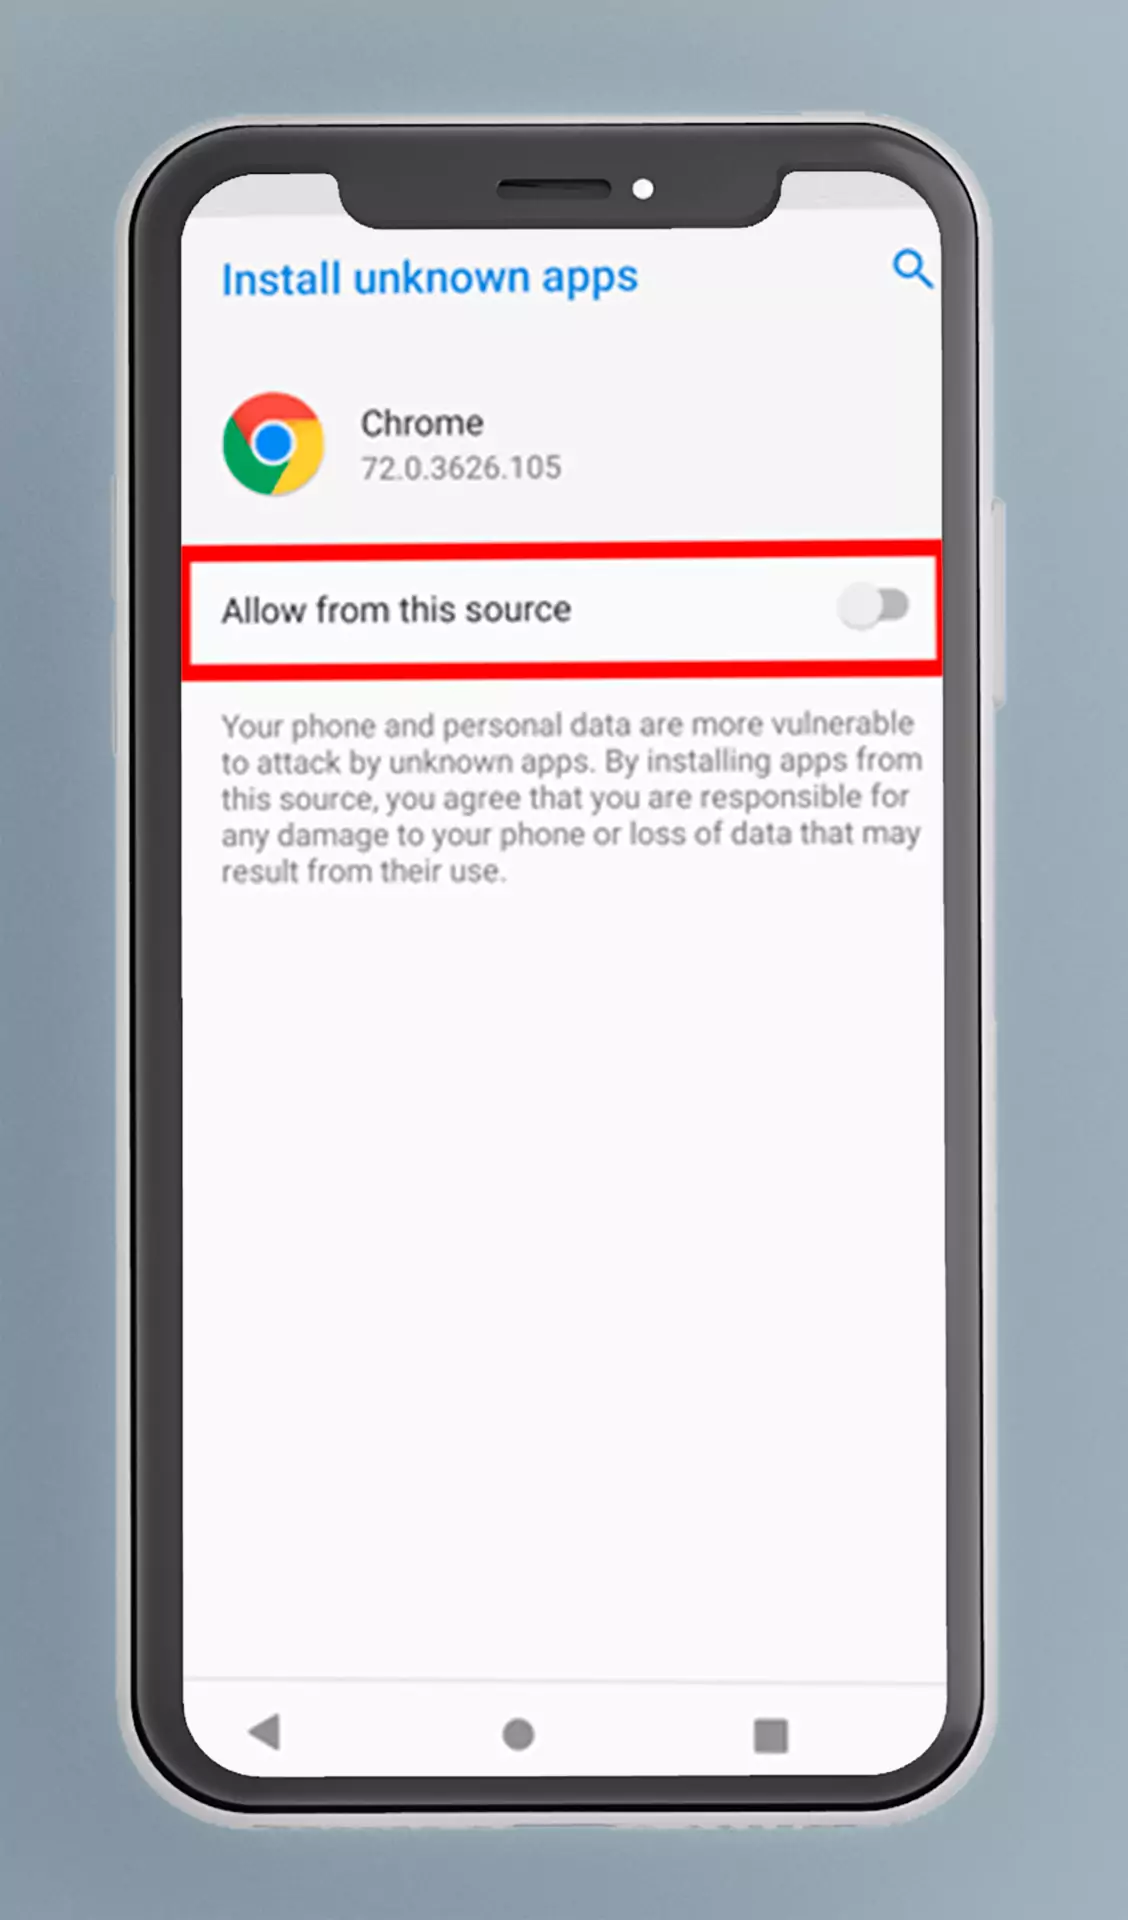 Let your phone install apps from unknown sources.